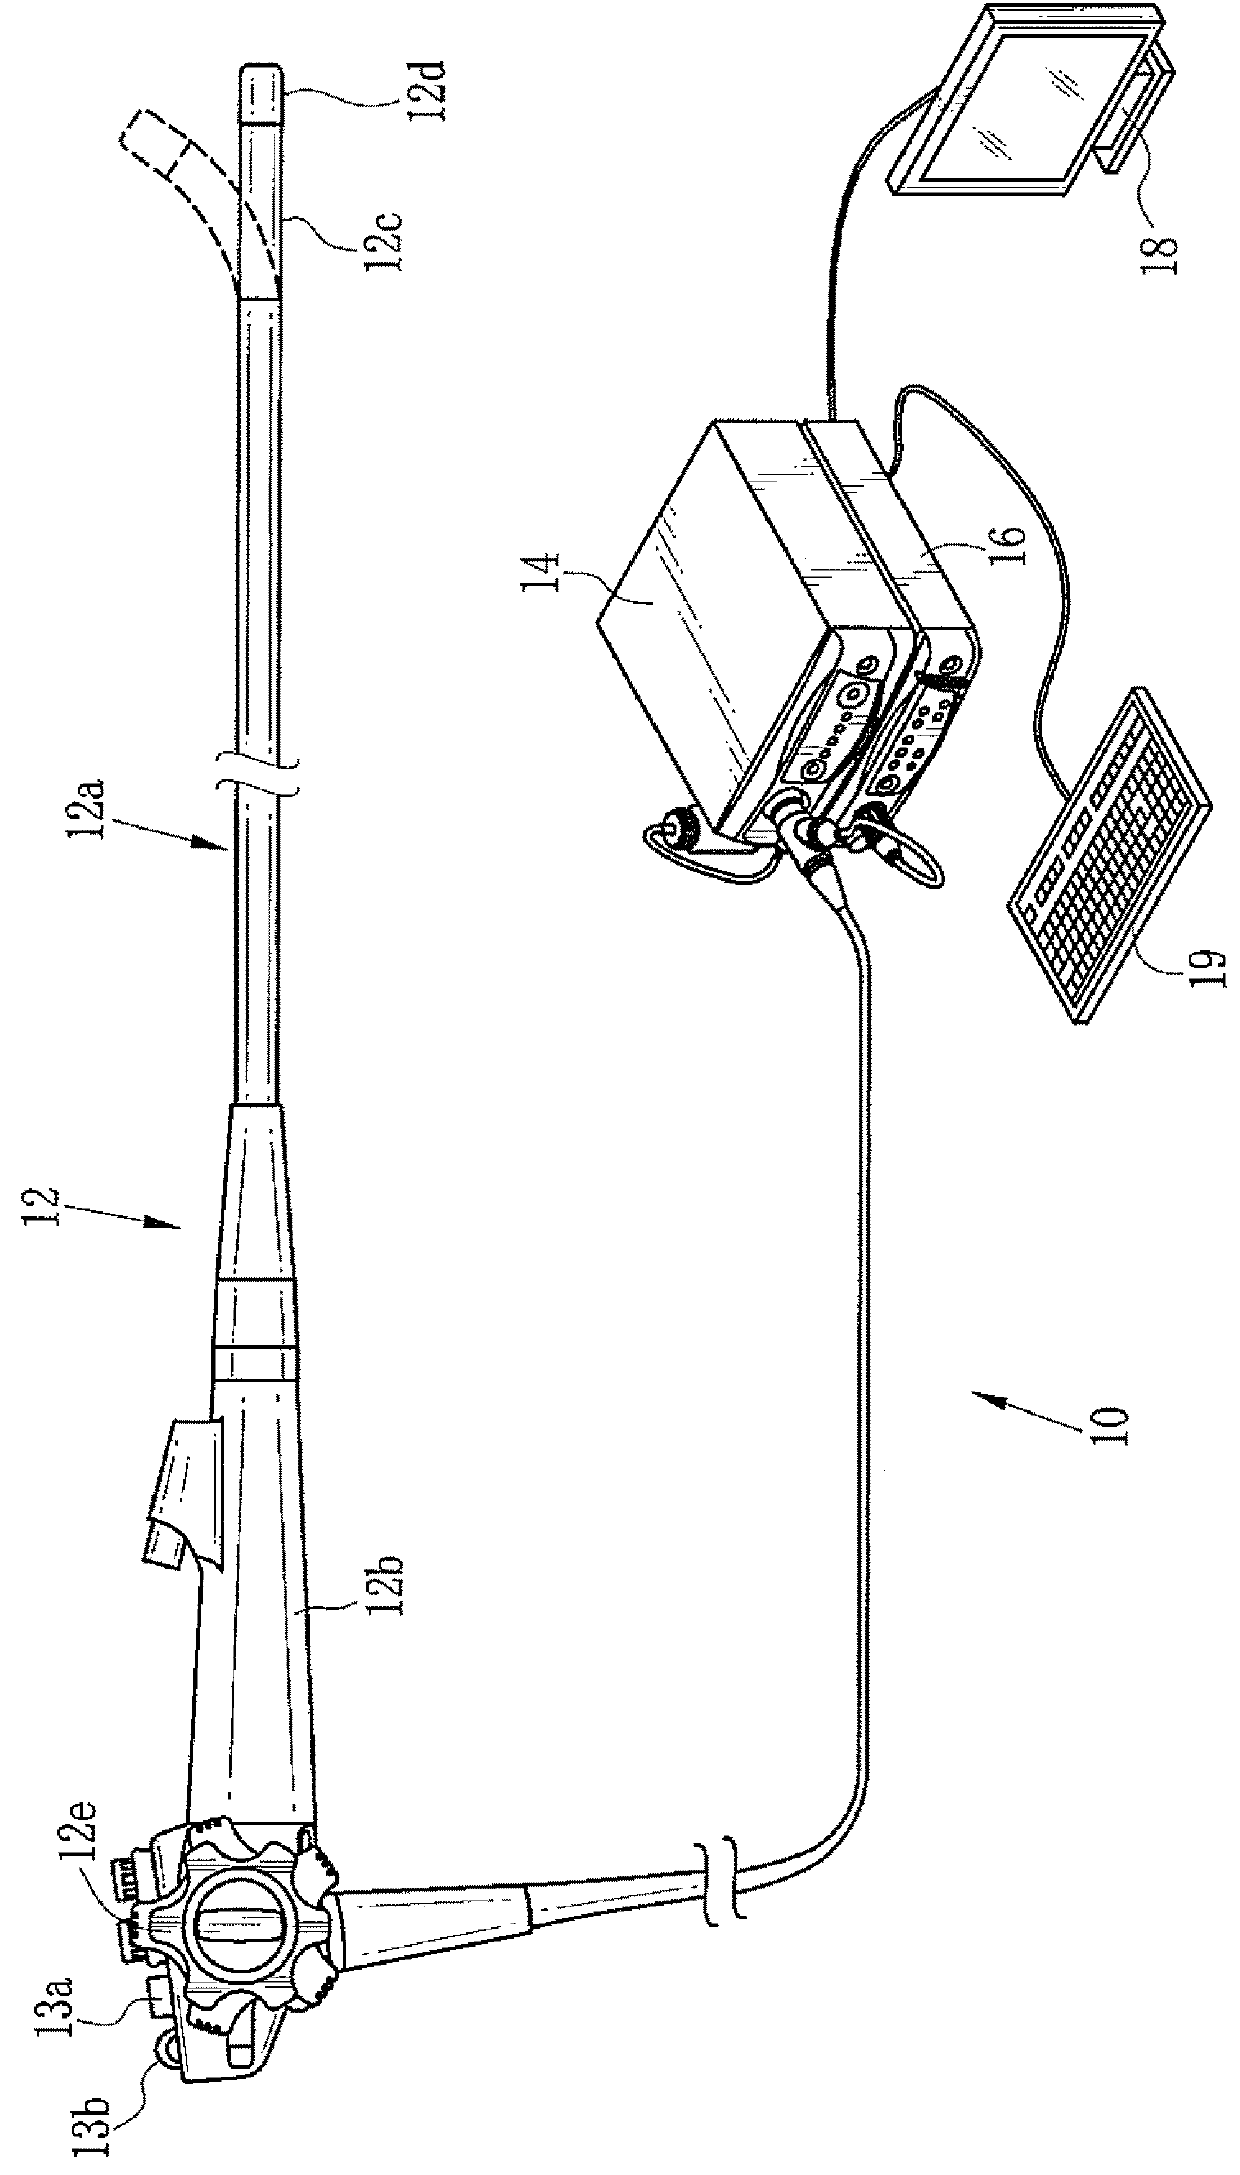 Endoscope system and method for operating the same